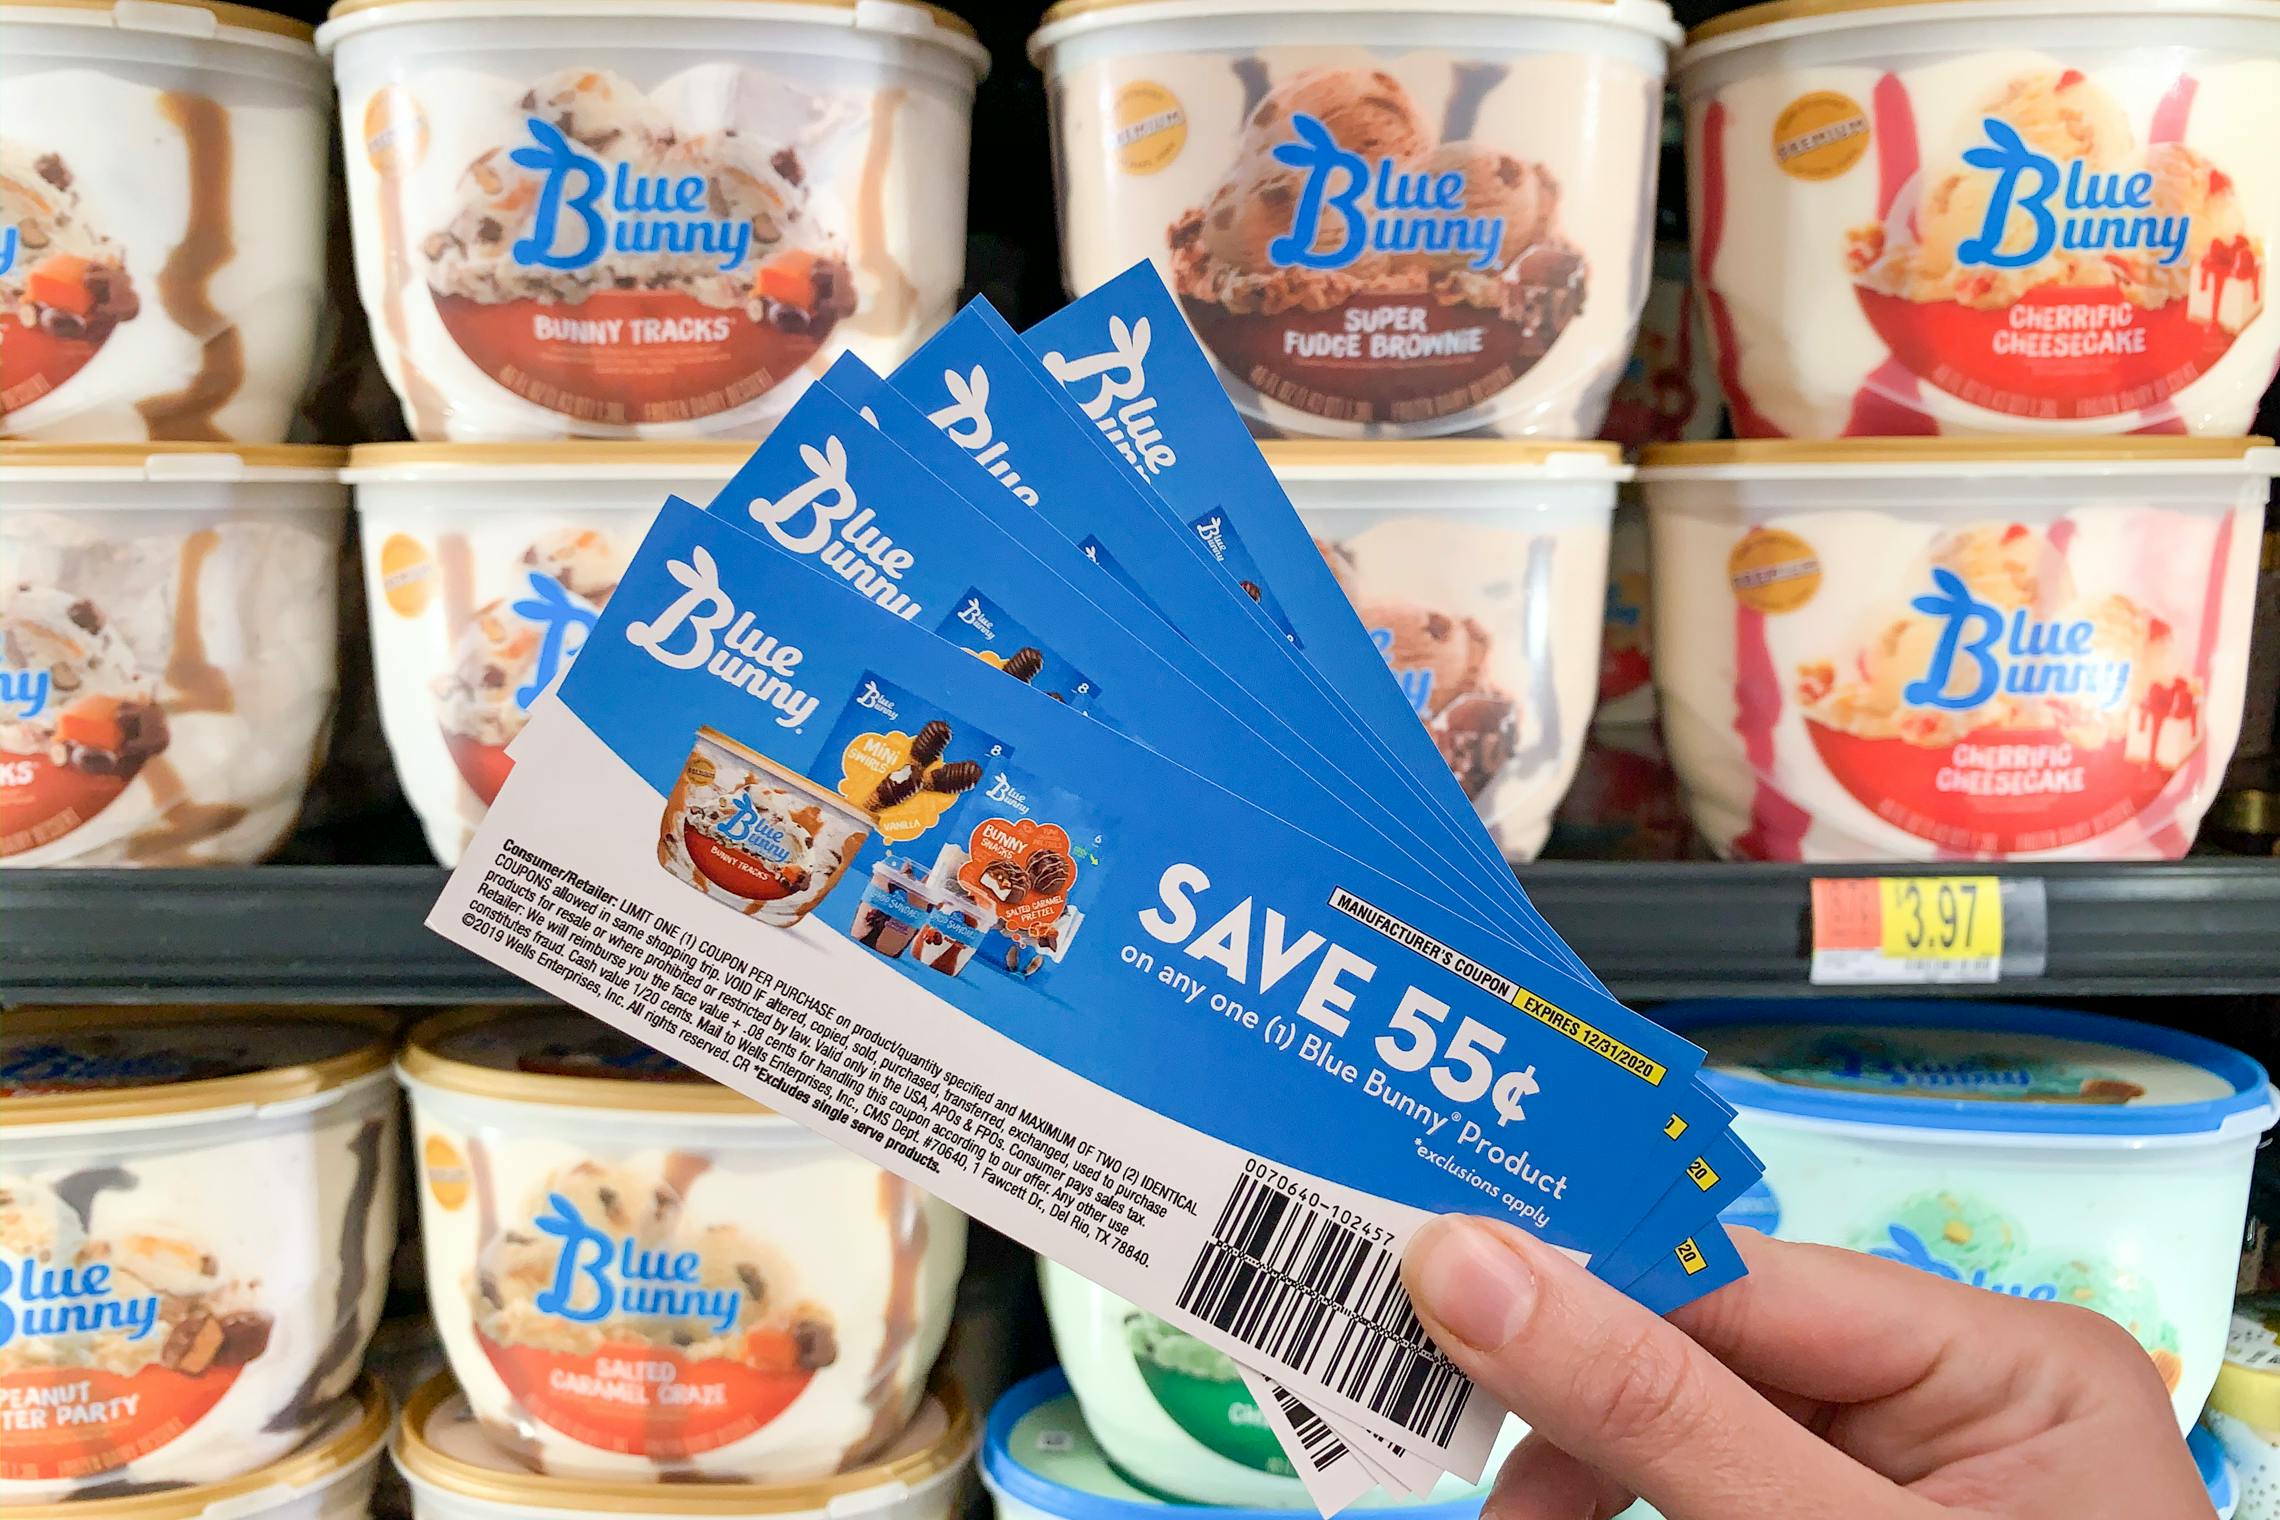 Blue Bunny Ice Cream coupons held in front of ice cream cooler in store.